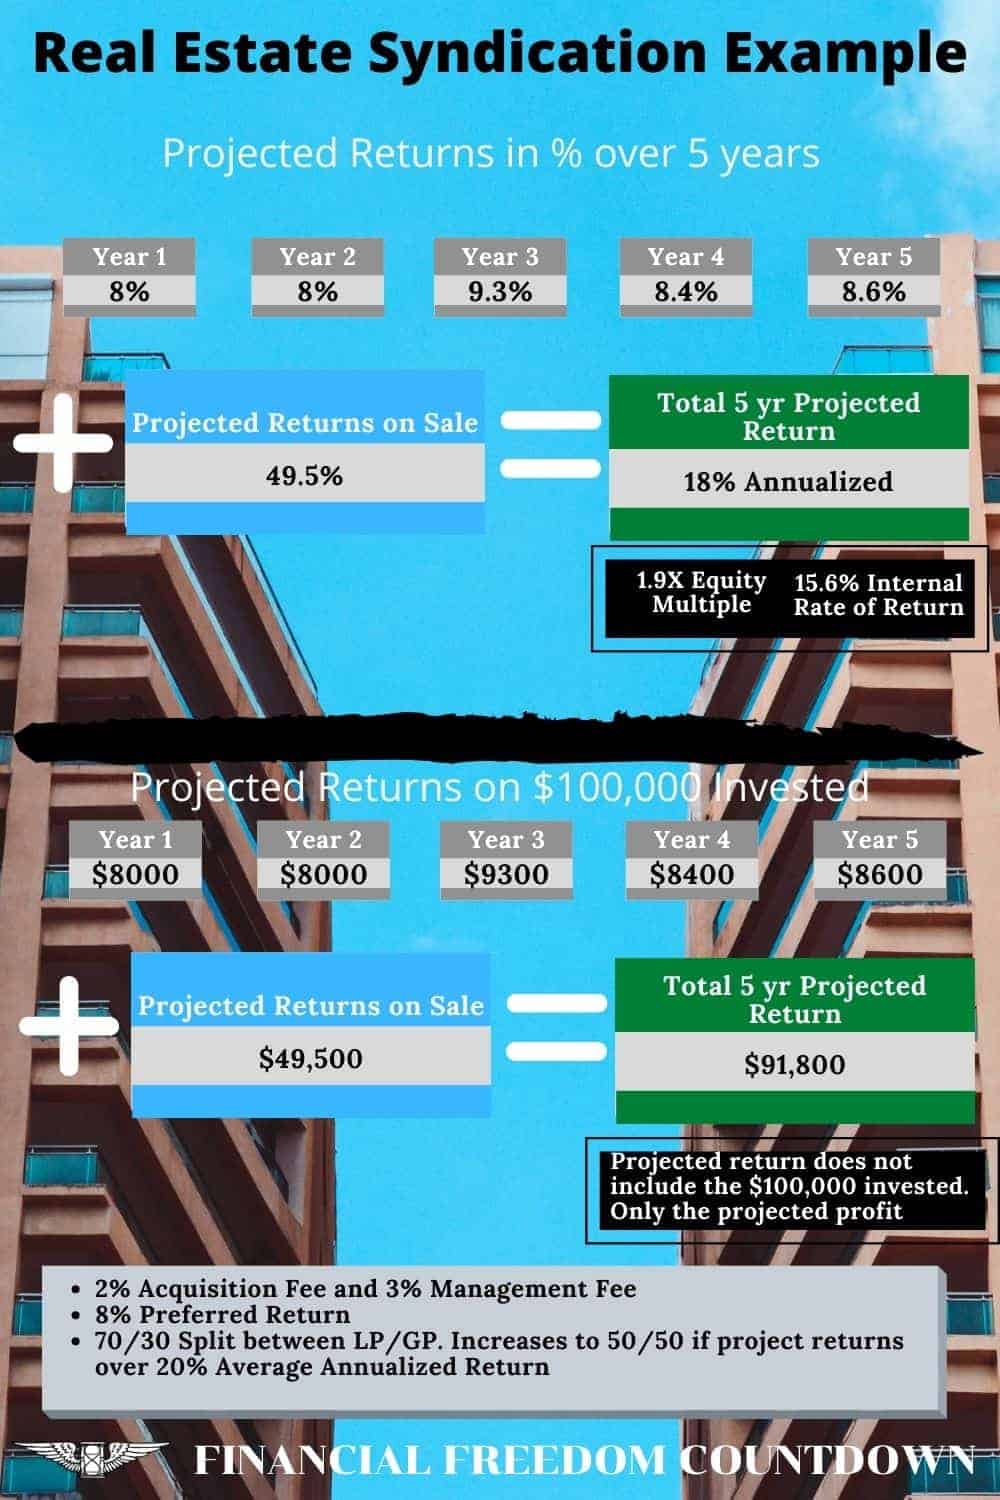 Real estate syndication example indicating the projected returns with the syndication fees and waterfall method of equity split